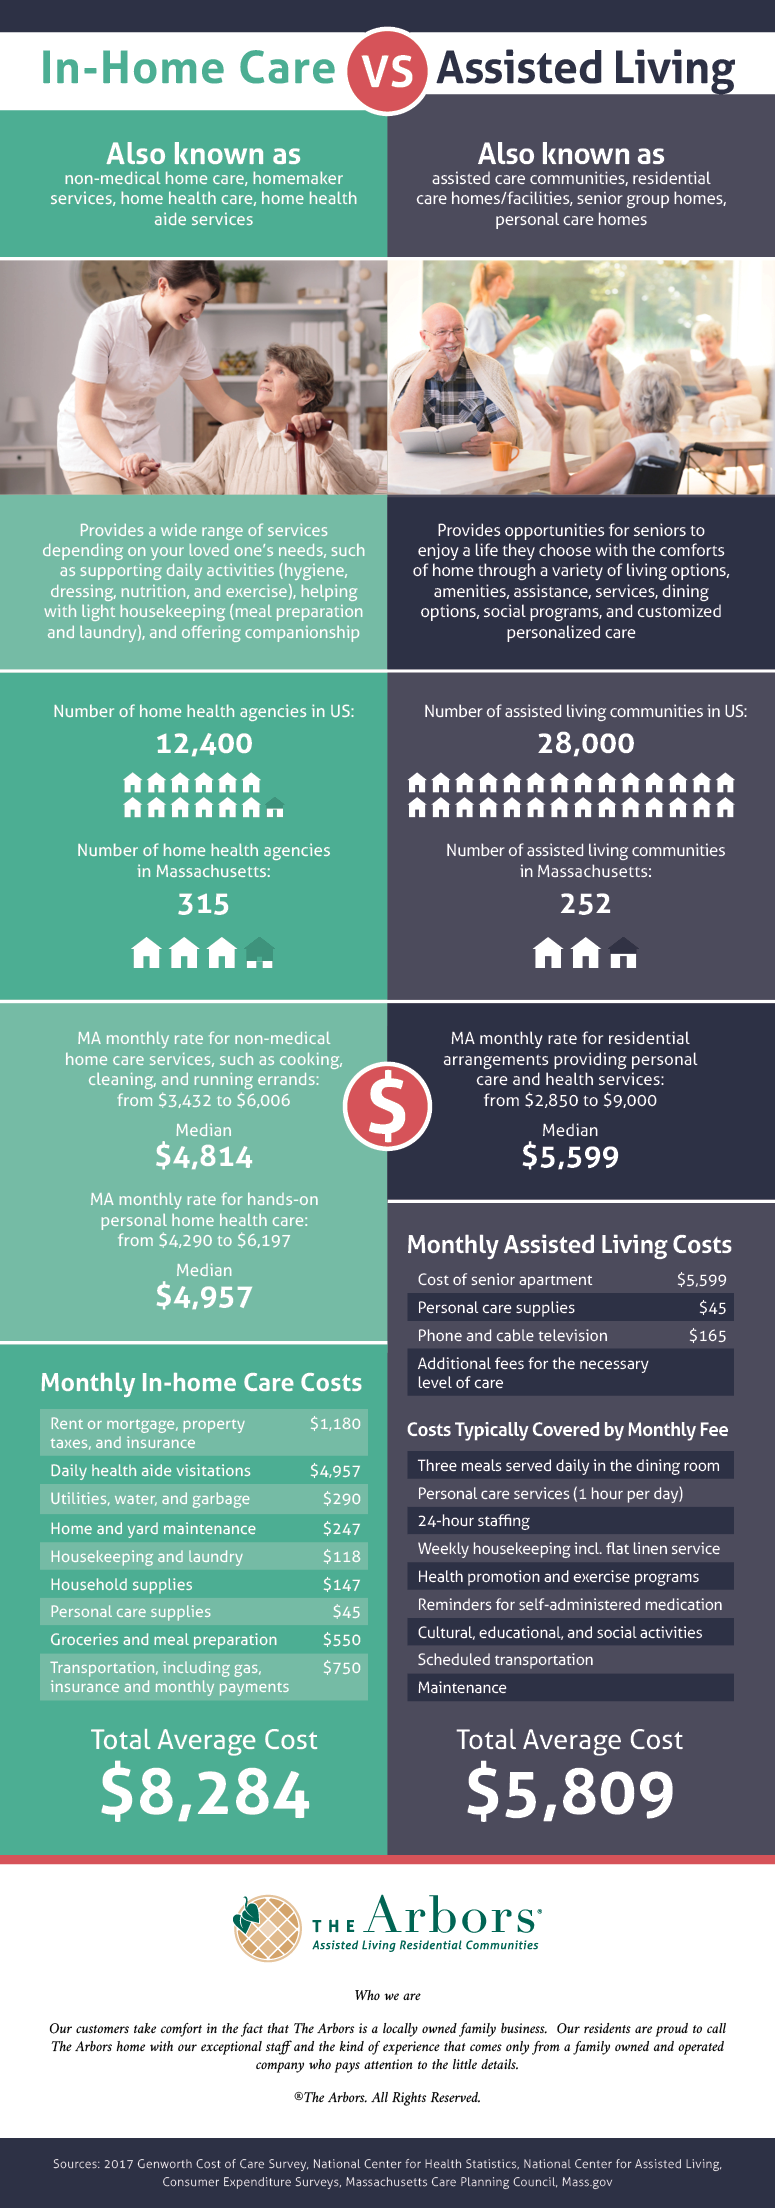 Infographic Comparing In Home Care And Assisted Living Costs The Arbors